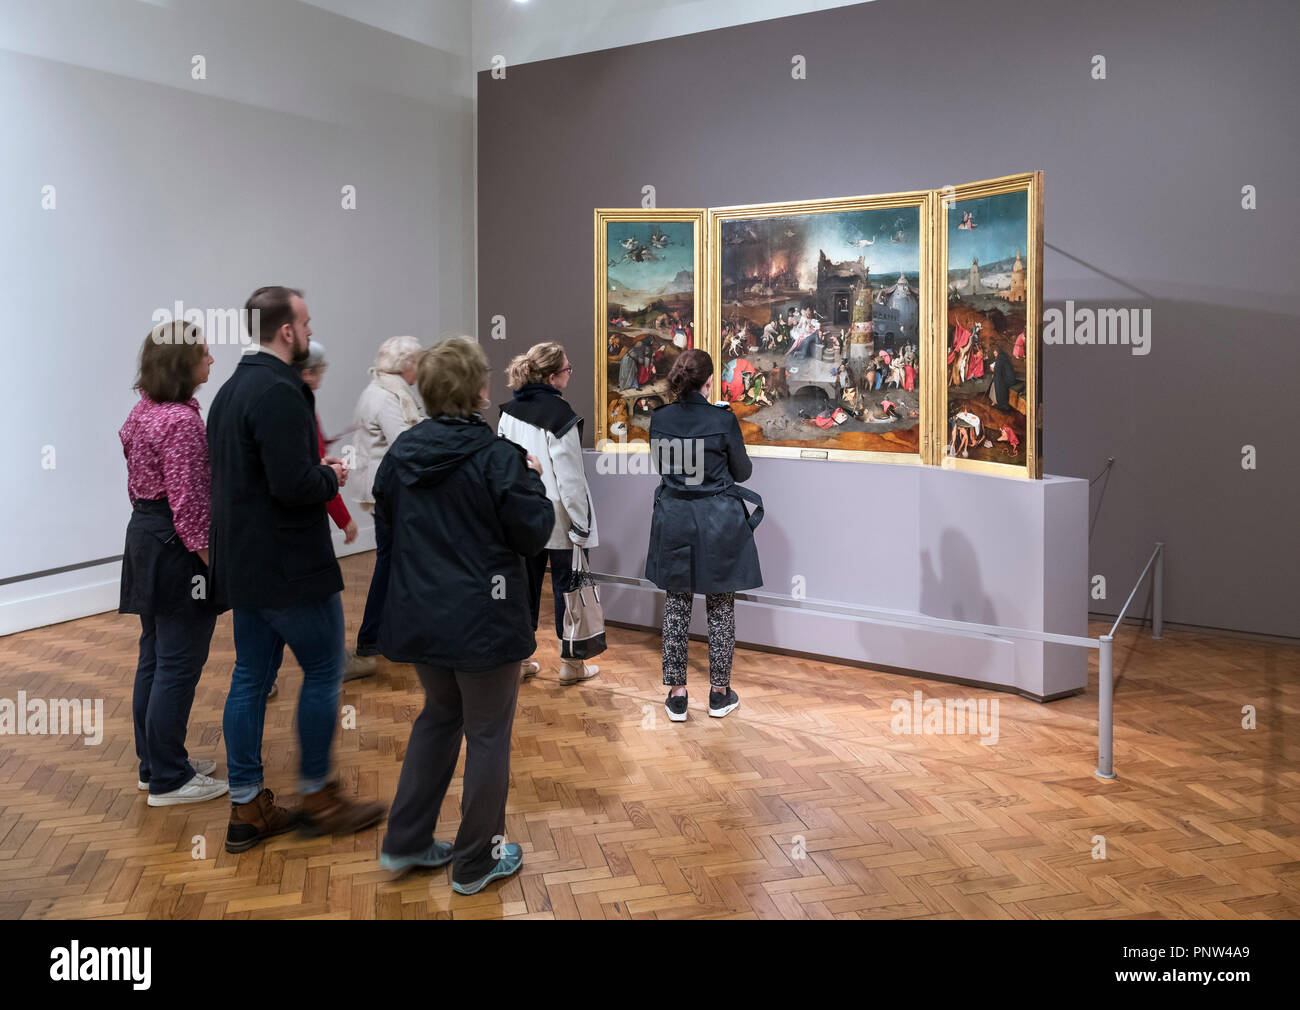 Visitors looking at the painting 'The Temptation of St Anthony' by Hieronymus Bosch, Museu Nacional de Arte Antiga, Lisbon, Portugal Stock Photo